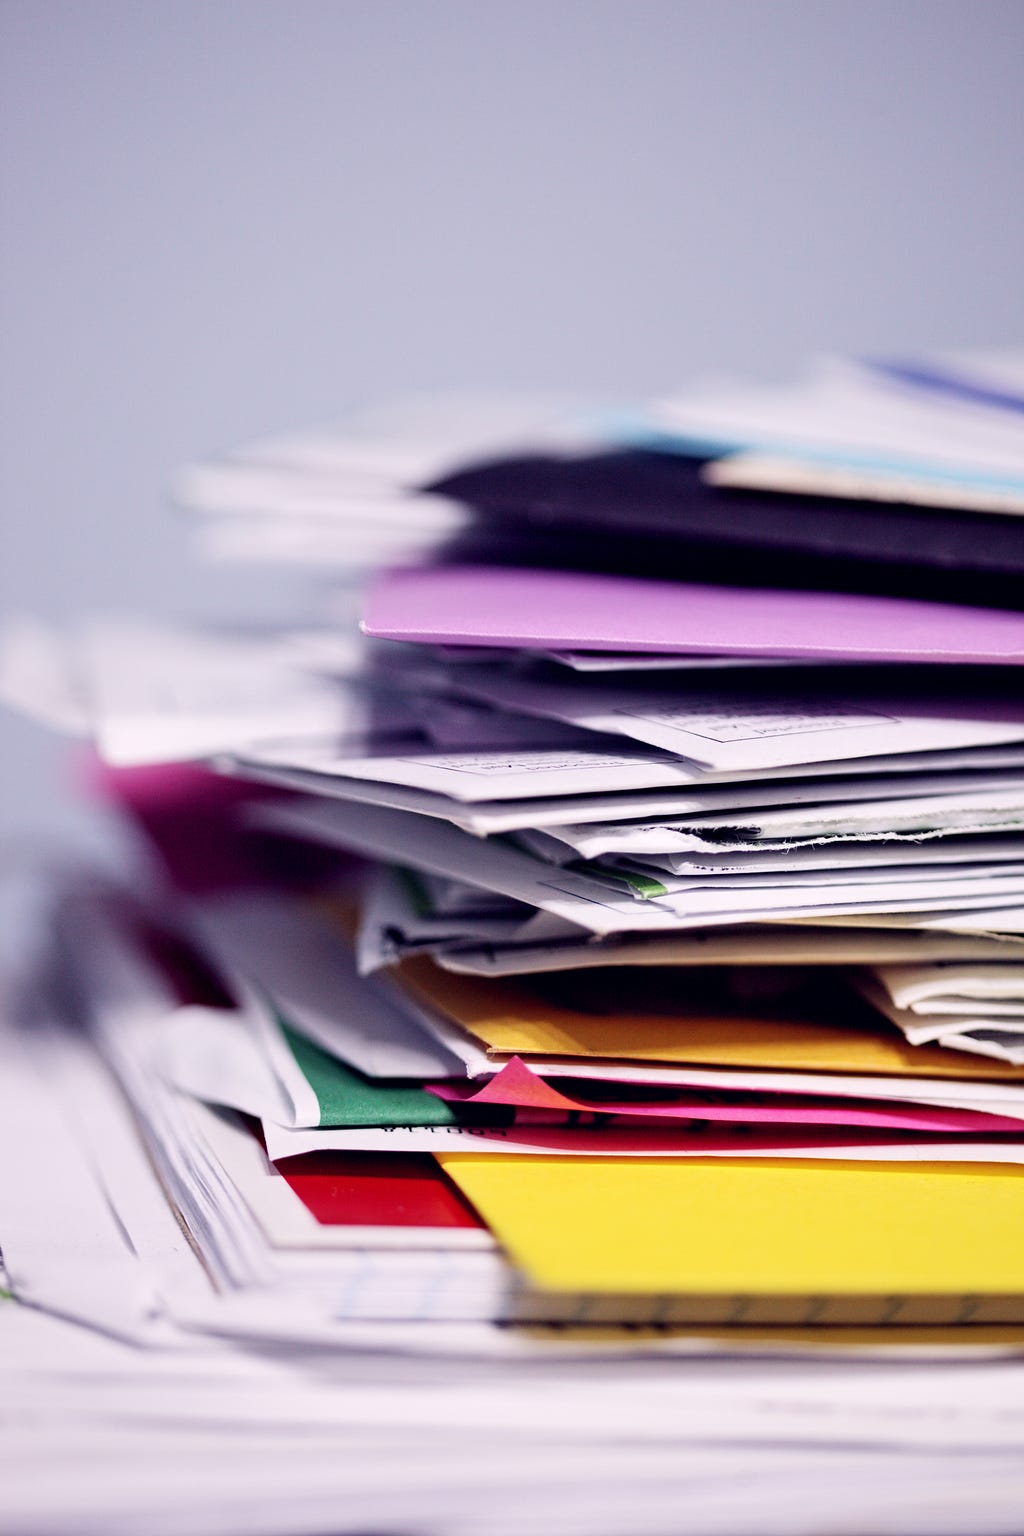 An untidy stack of papers and folders, illustrative of the dozens of resumes hiring managers receive and must review for junior-level positions.